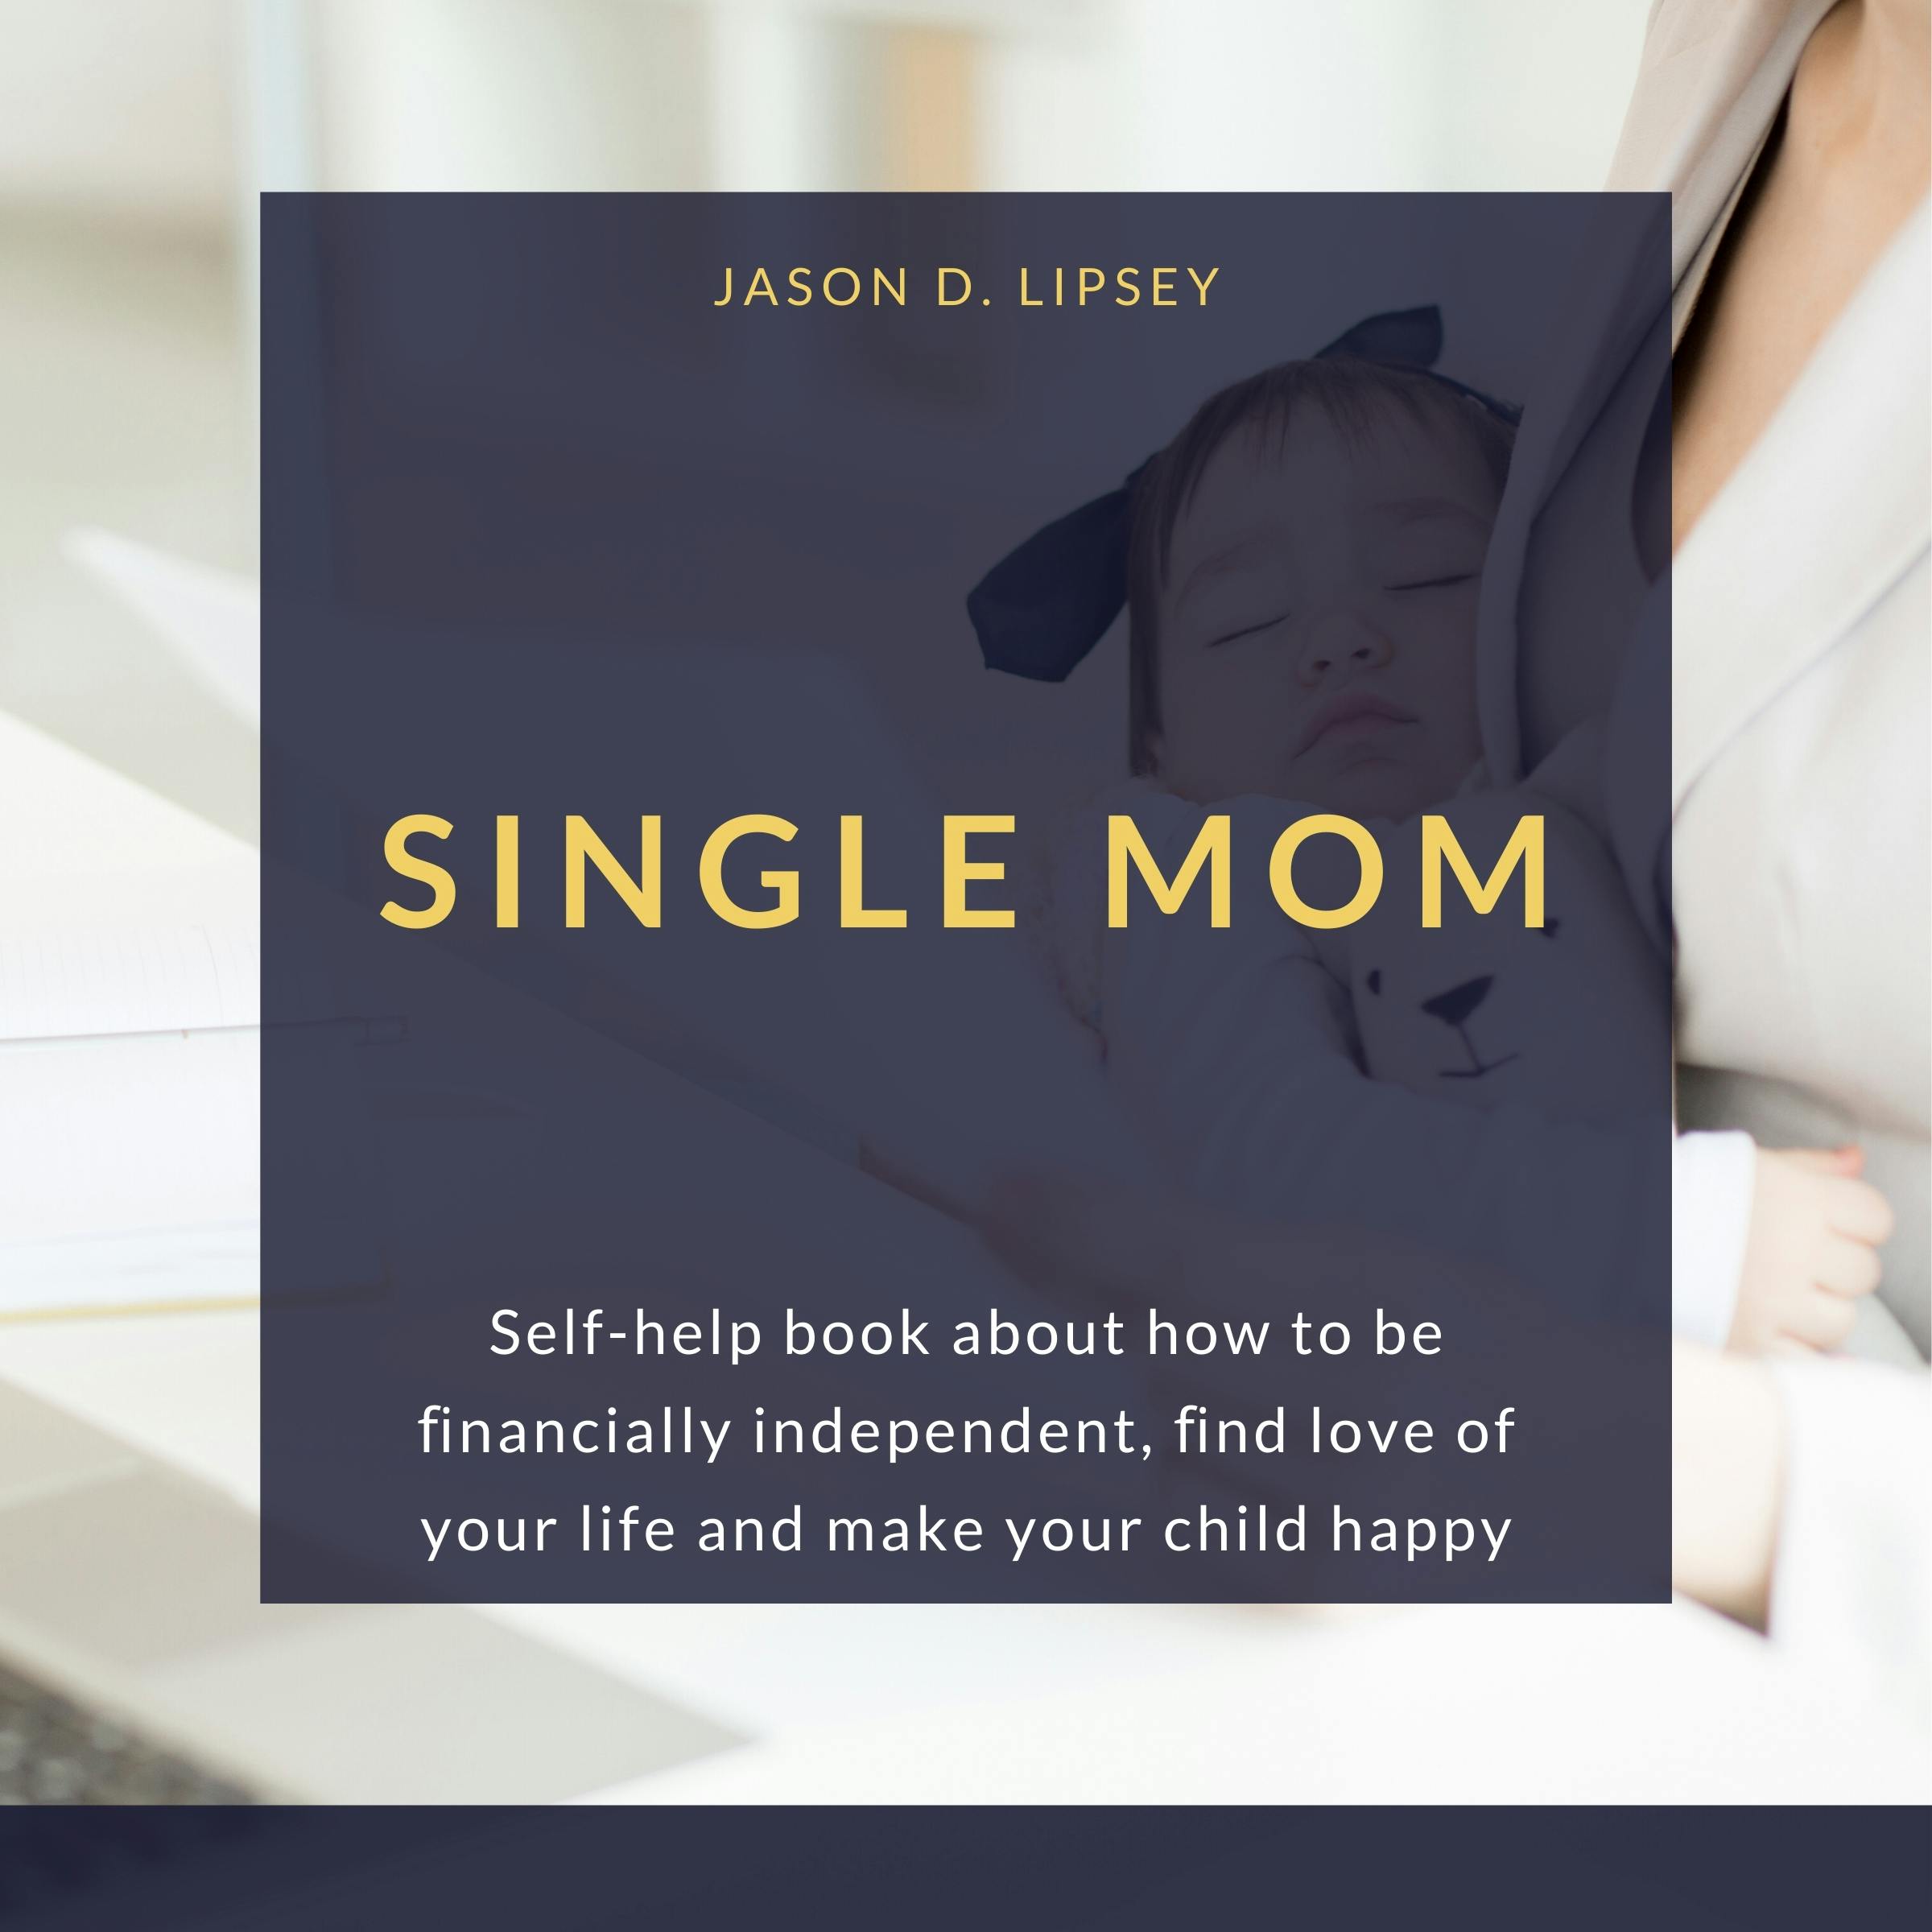 SINGLE MOM: Self-help book about how to be ﬁnancially independent, ﬁnd love of your life and make your child happy - undefined